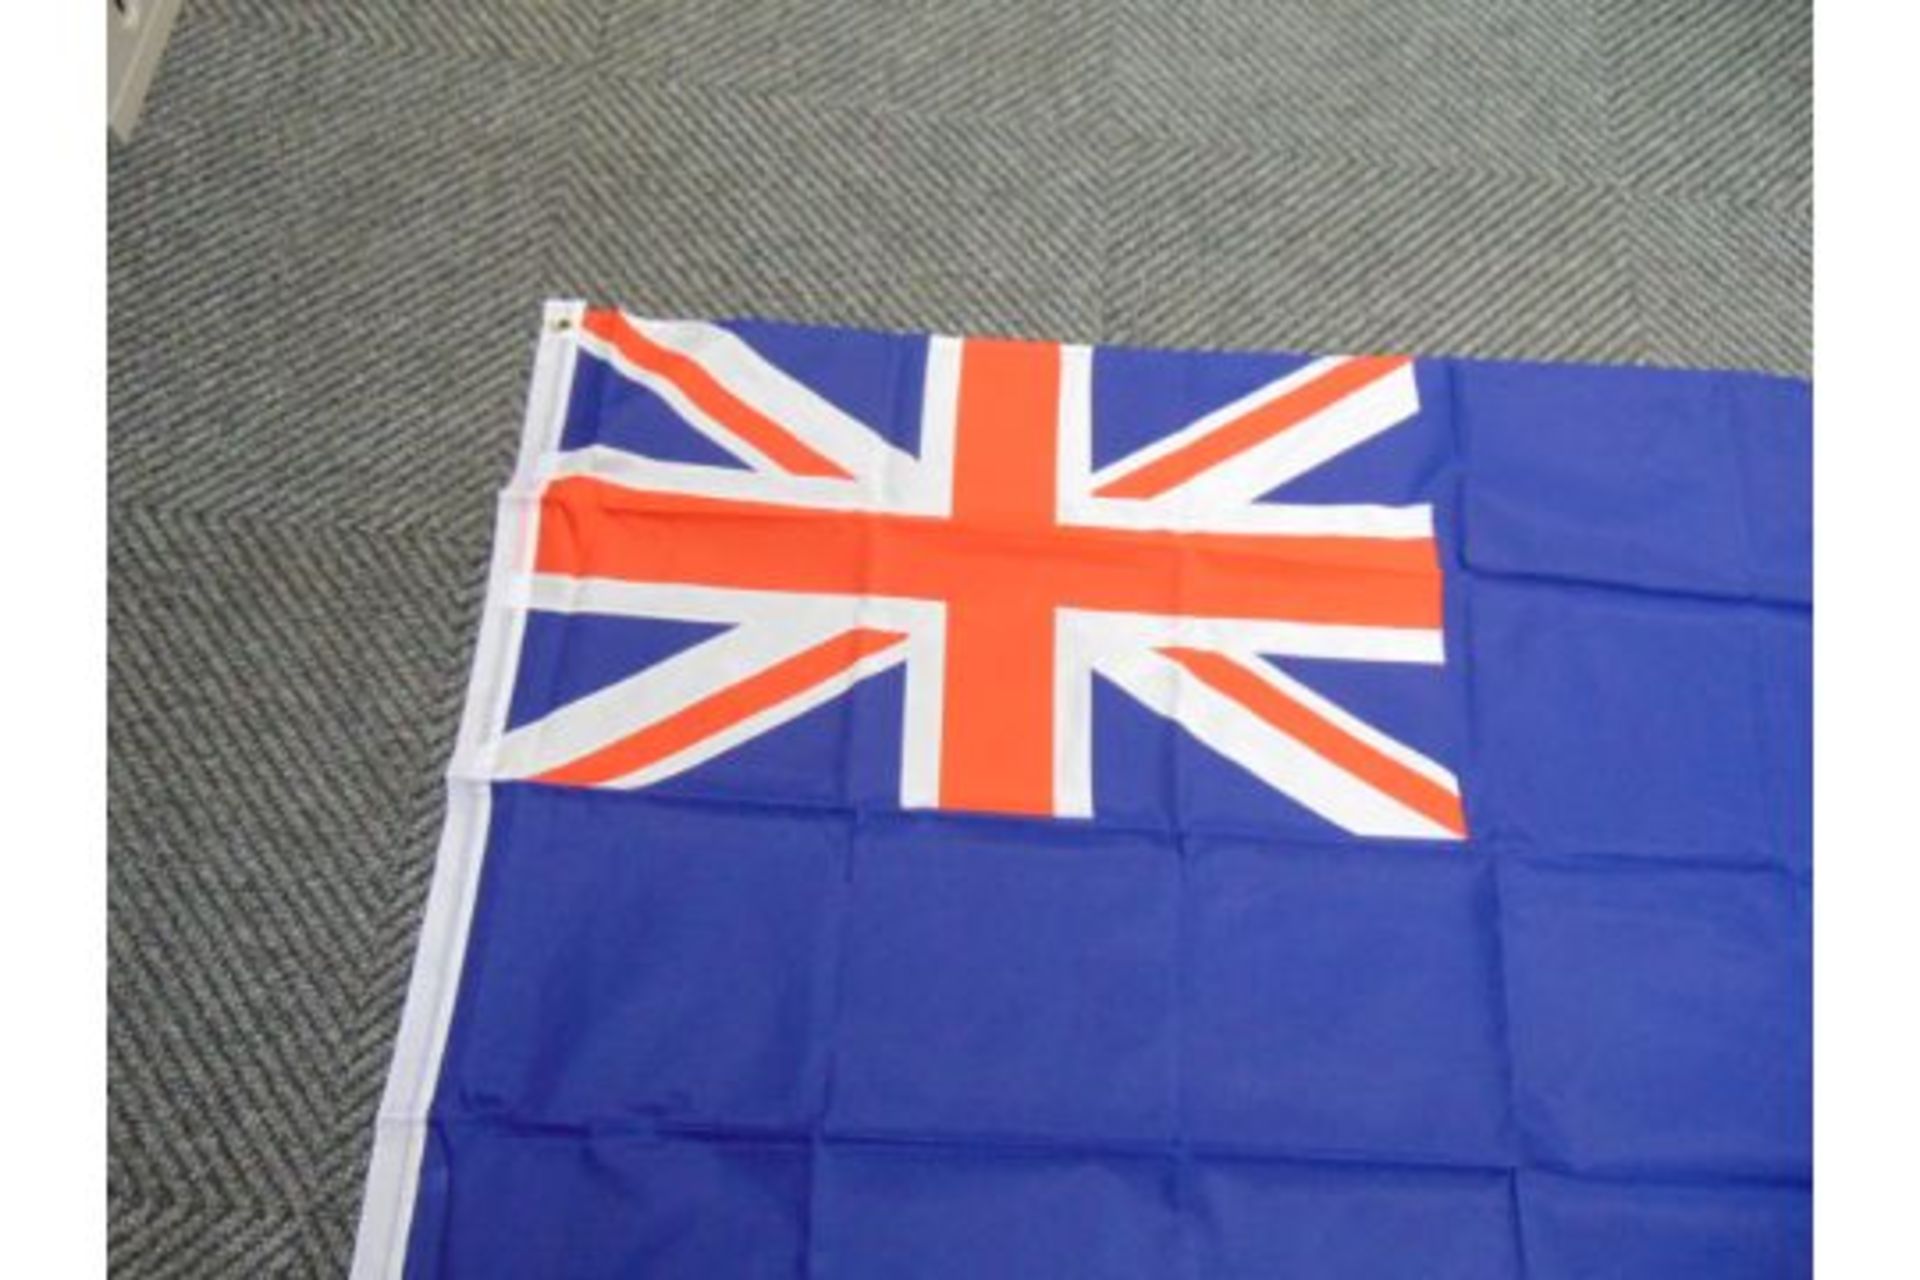 Blue Ensign Flag - 5ft x 3ft with Metal Eyelets. - Image 3 of 5